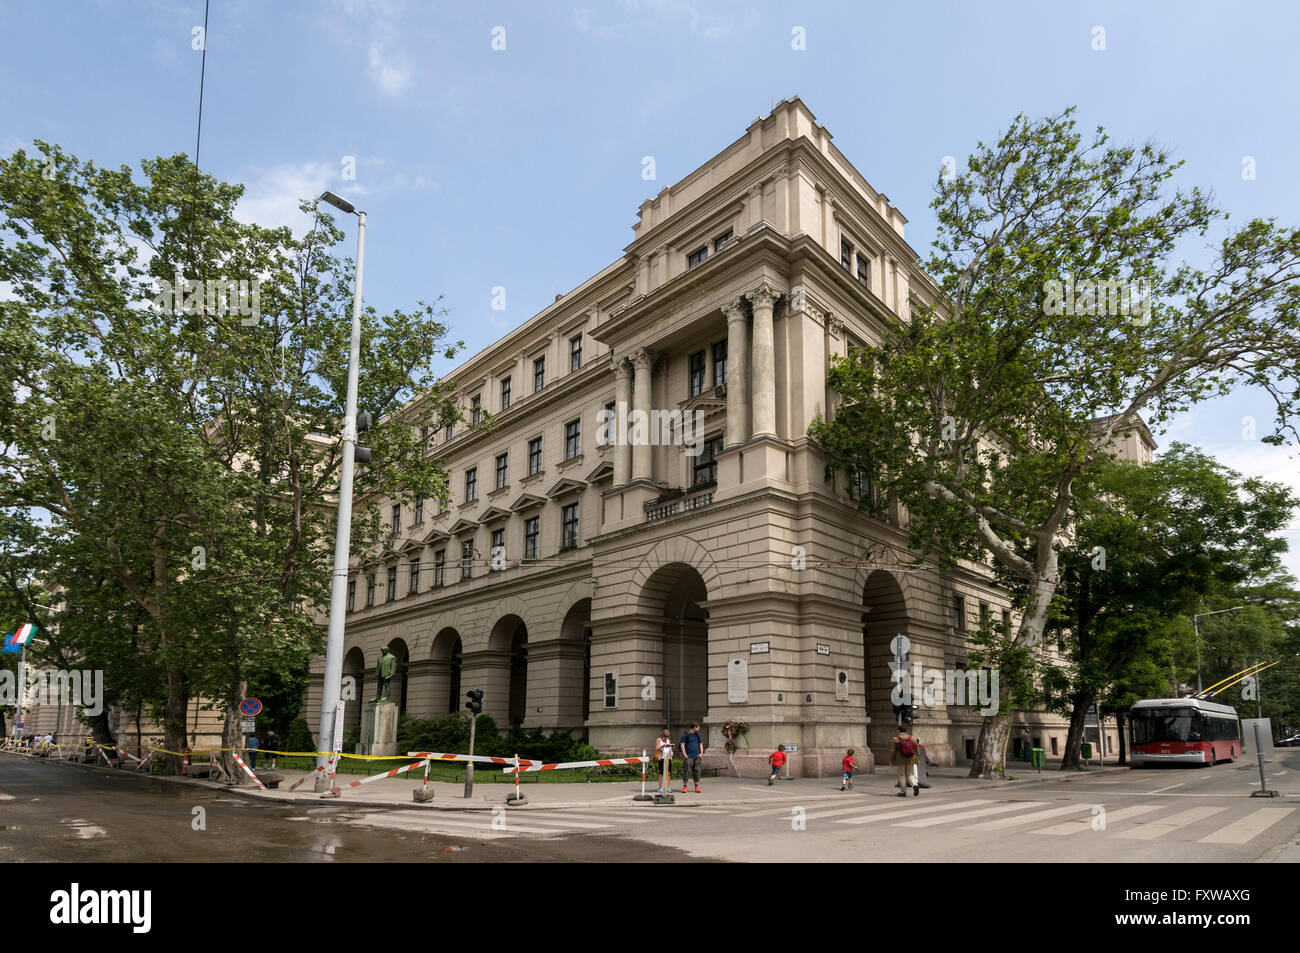 Ministry of Rural Development in Kossuth Lajos tér, Budapest, Hungary Stock Photo